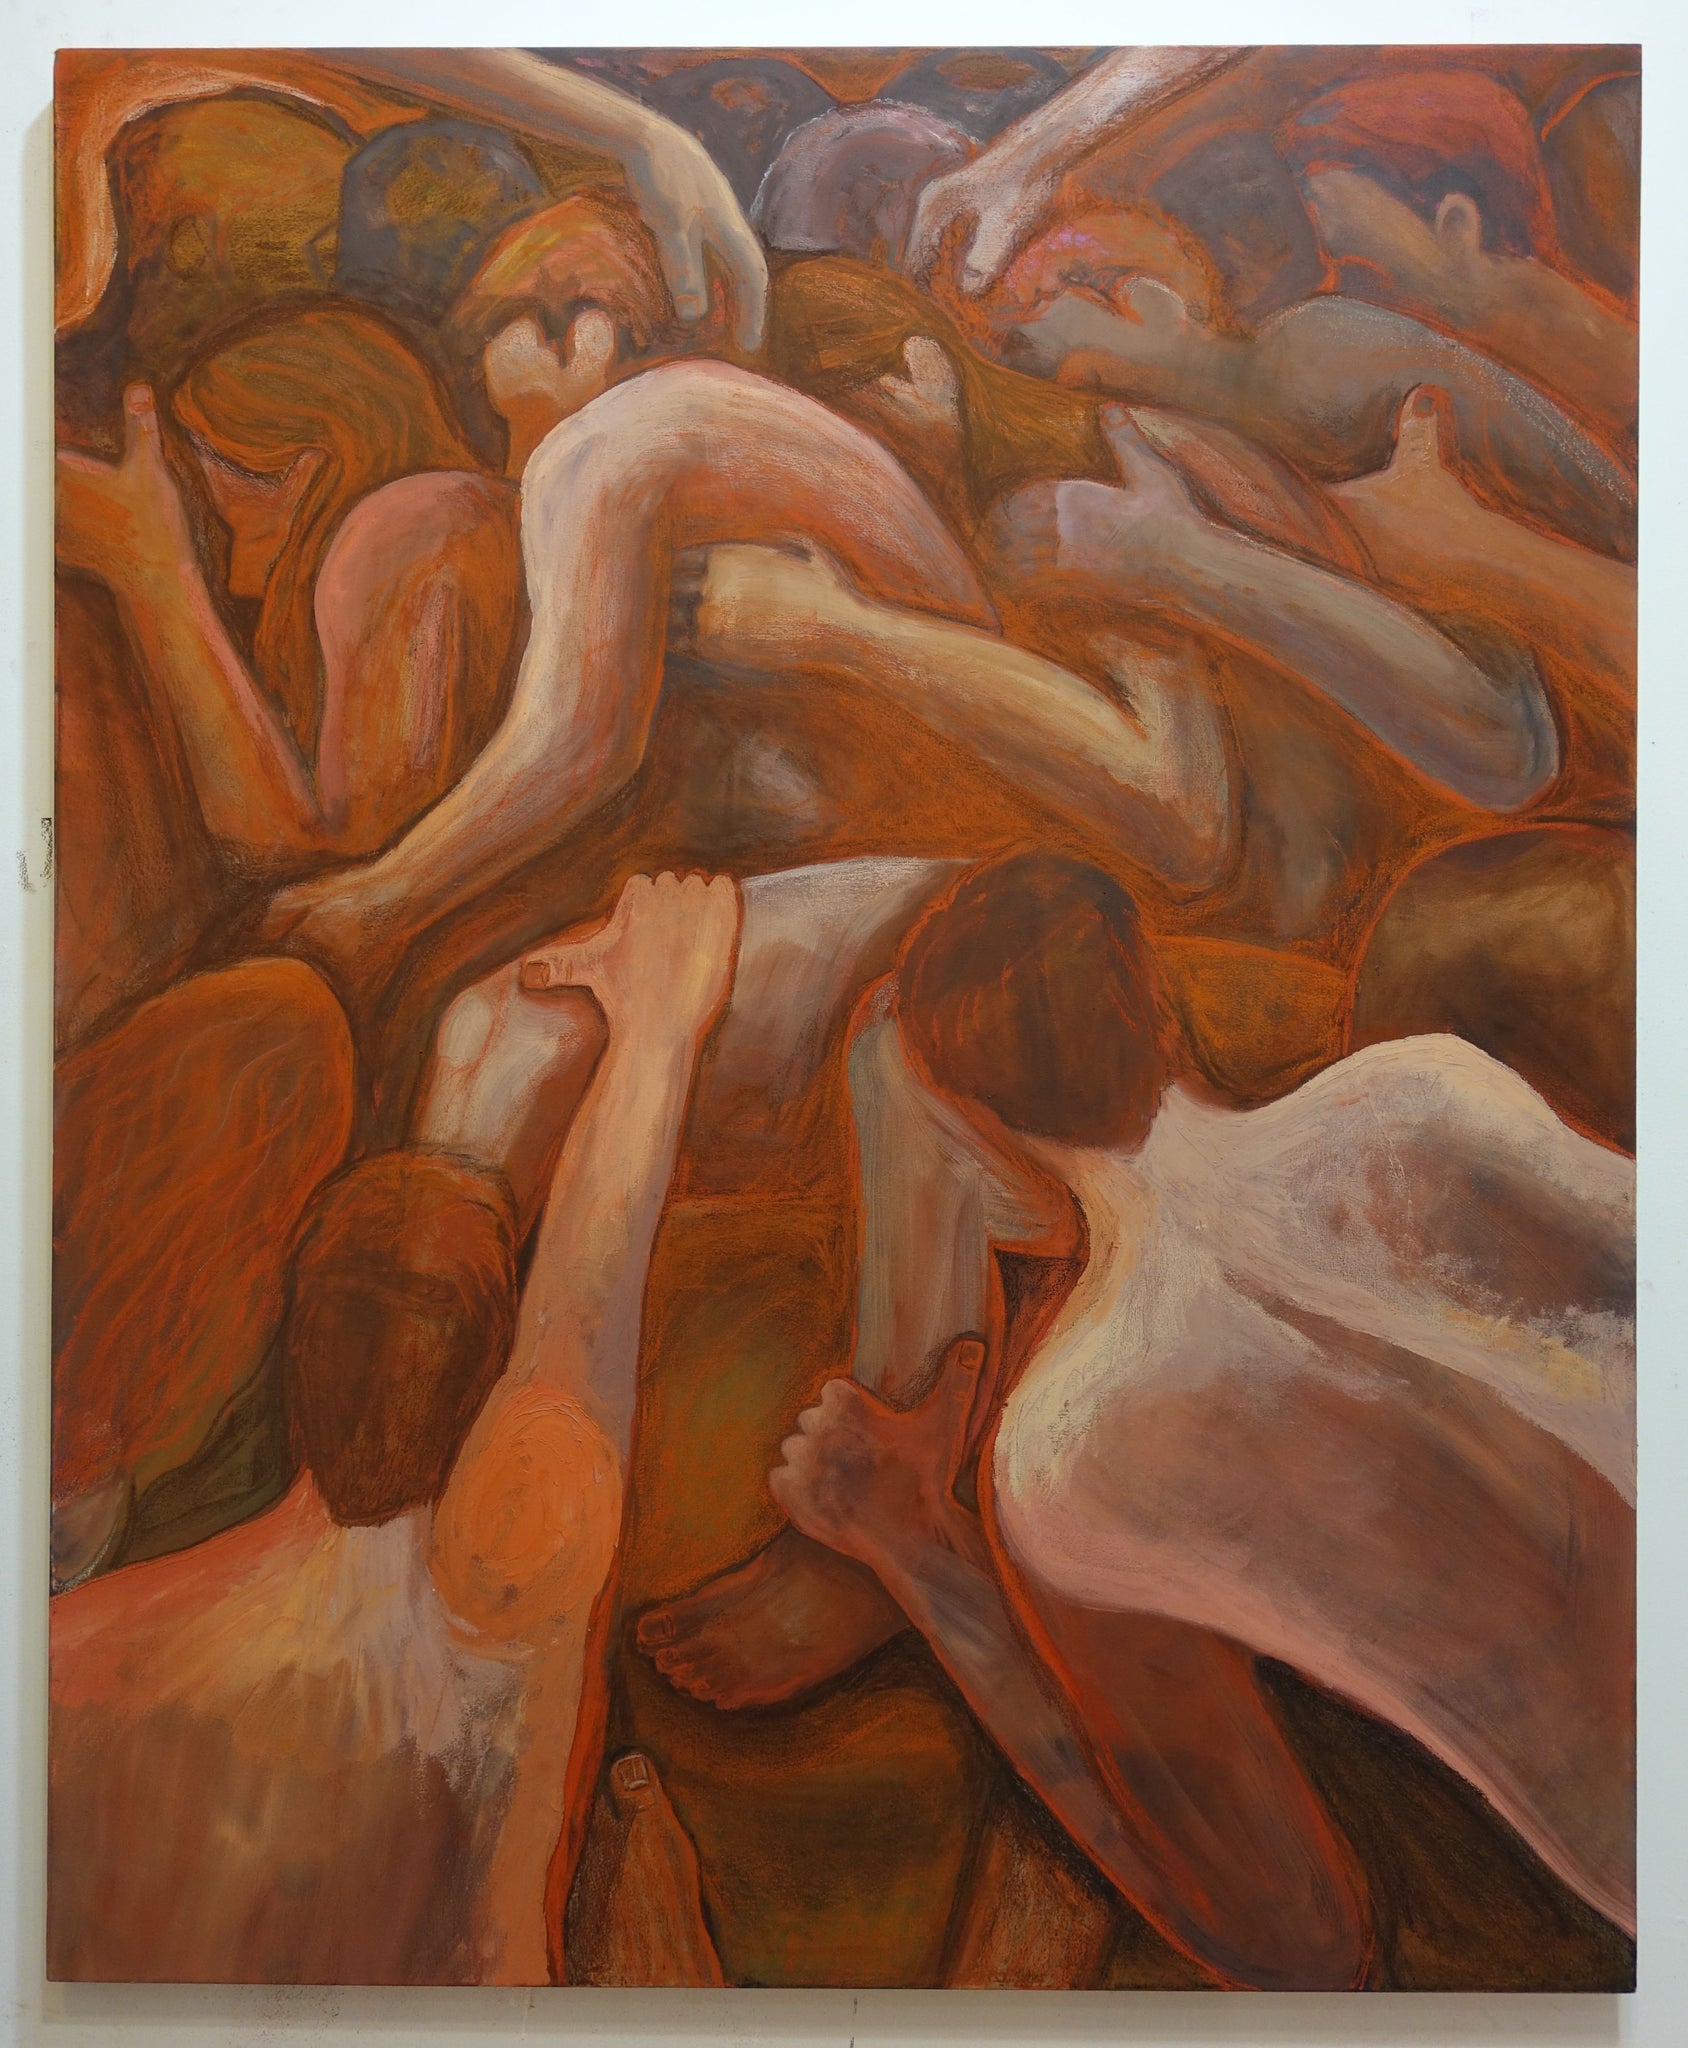 Dylan Hurwitz, "the cuddle puddle (#5)"